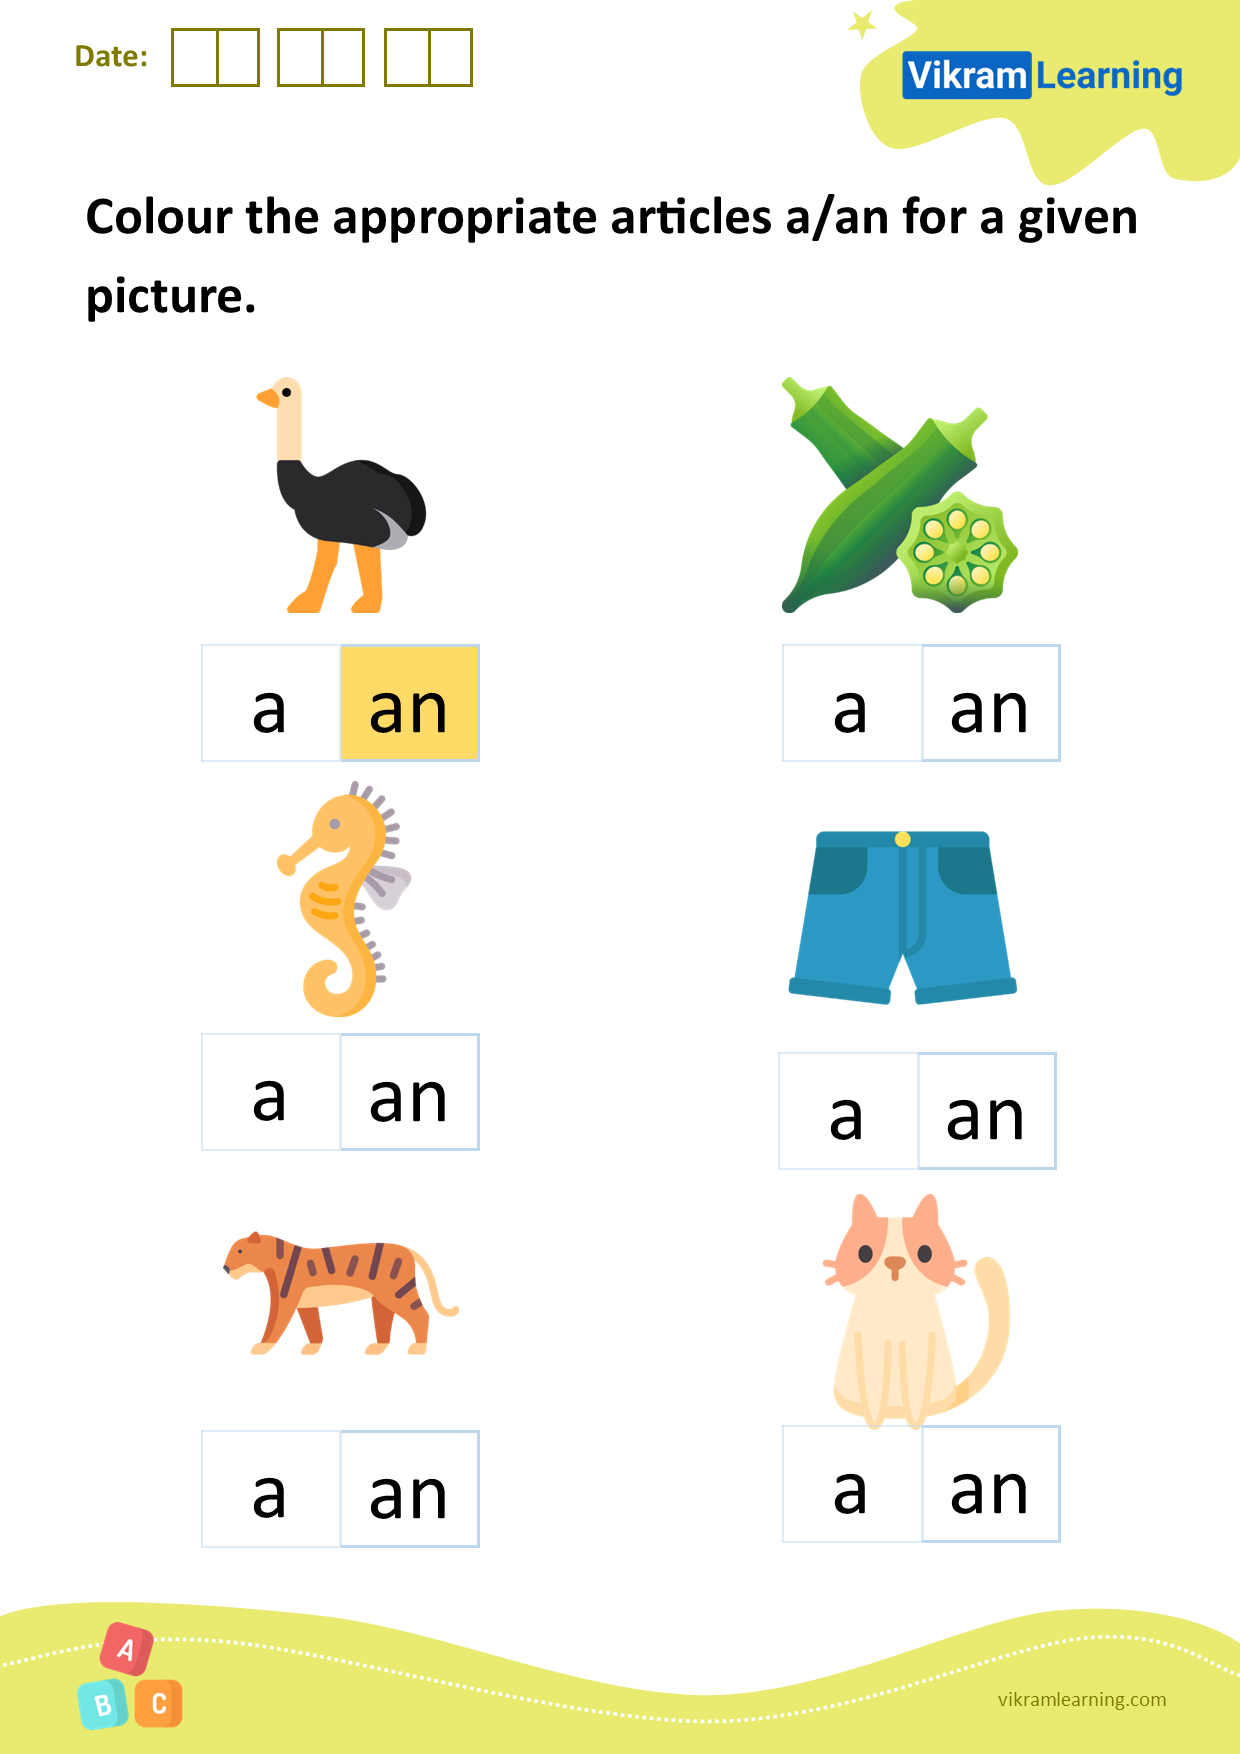 Download colour the appropriate articles a/an for a given picture worksheets